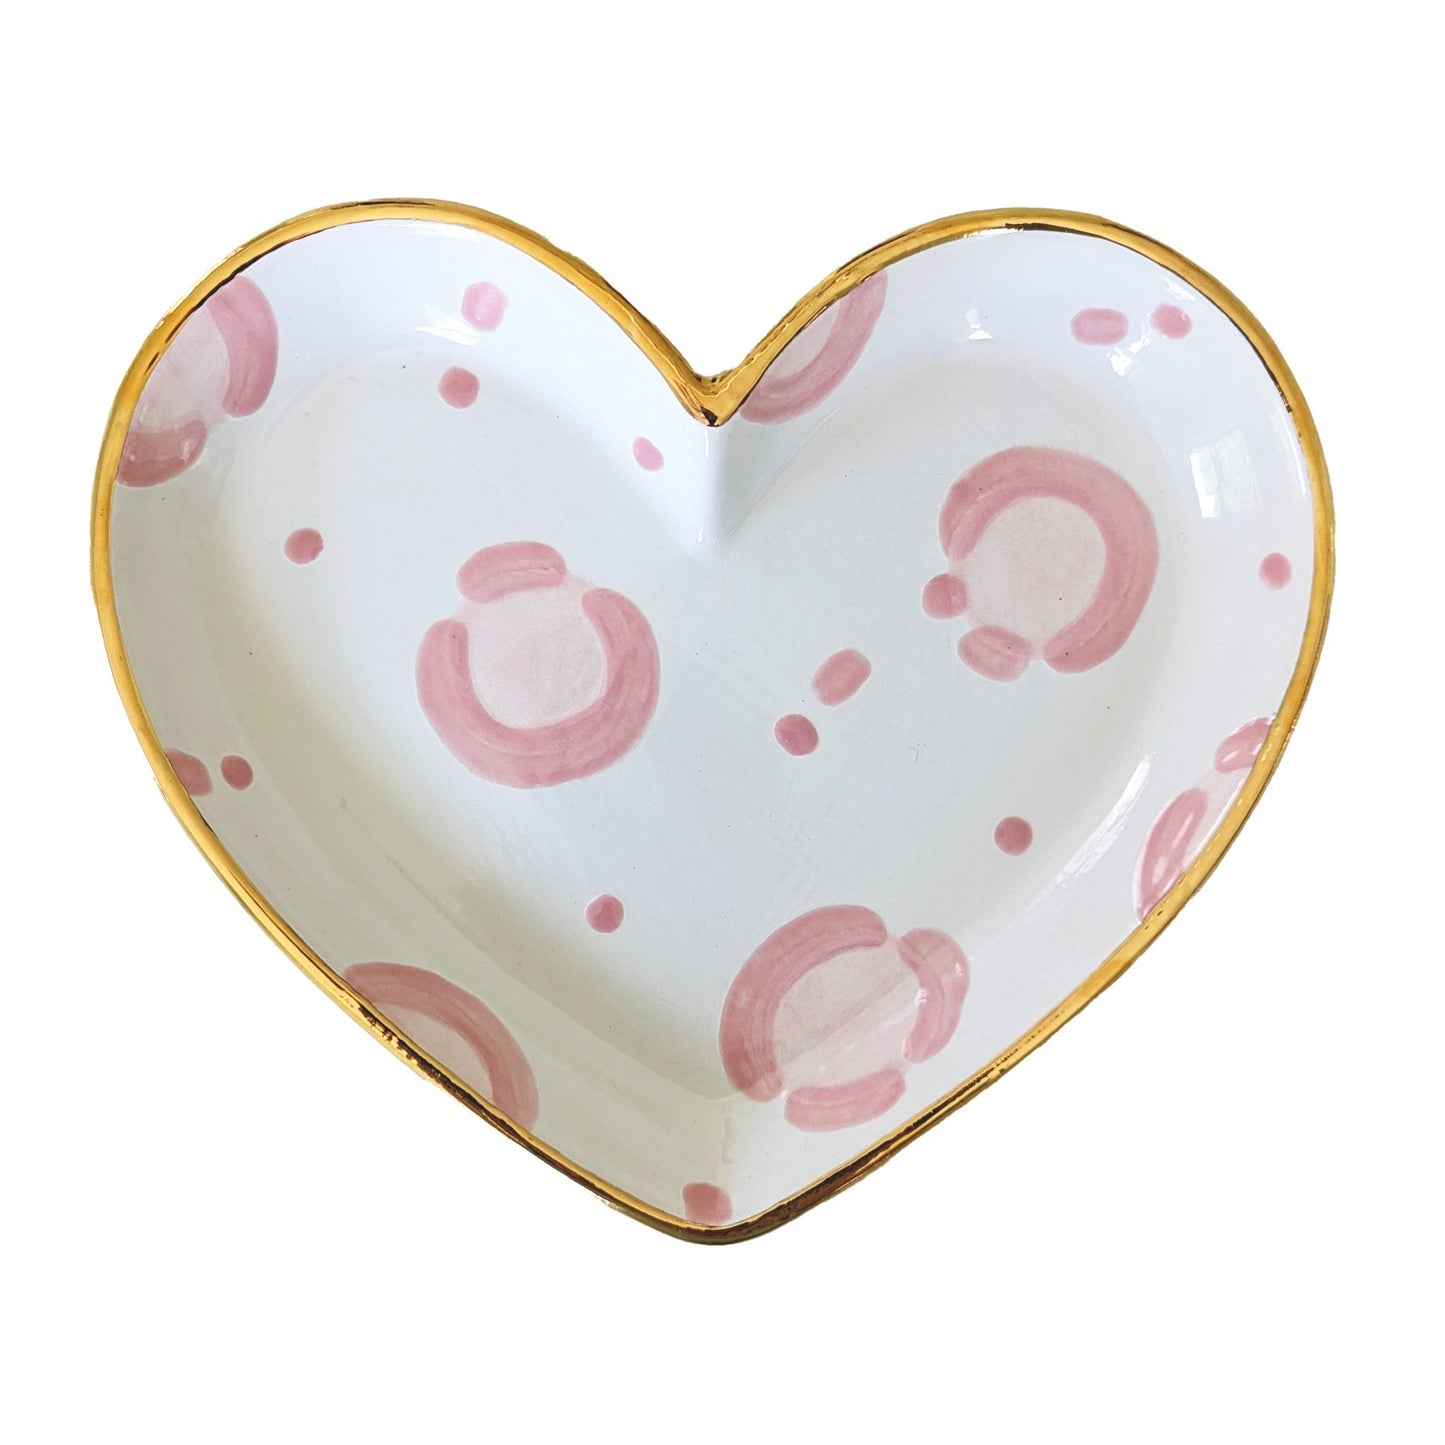 Leopard Print Heart Dishes